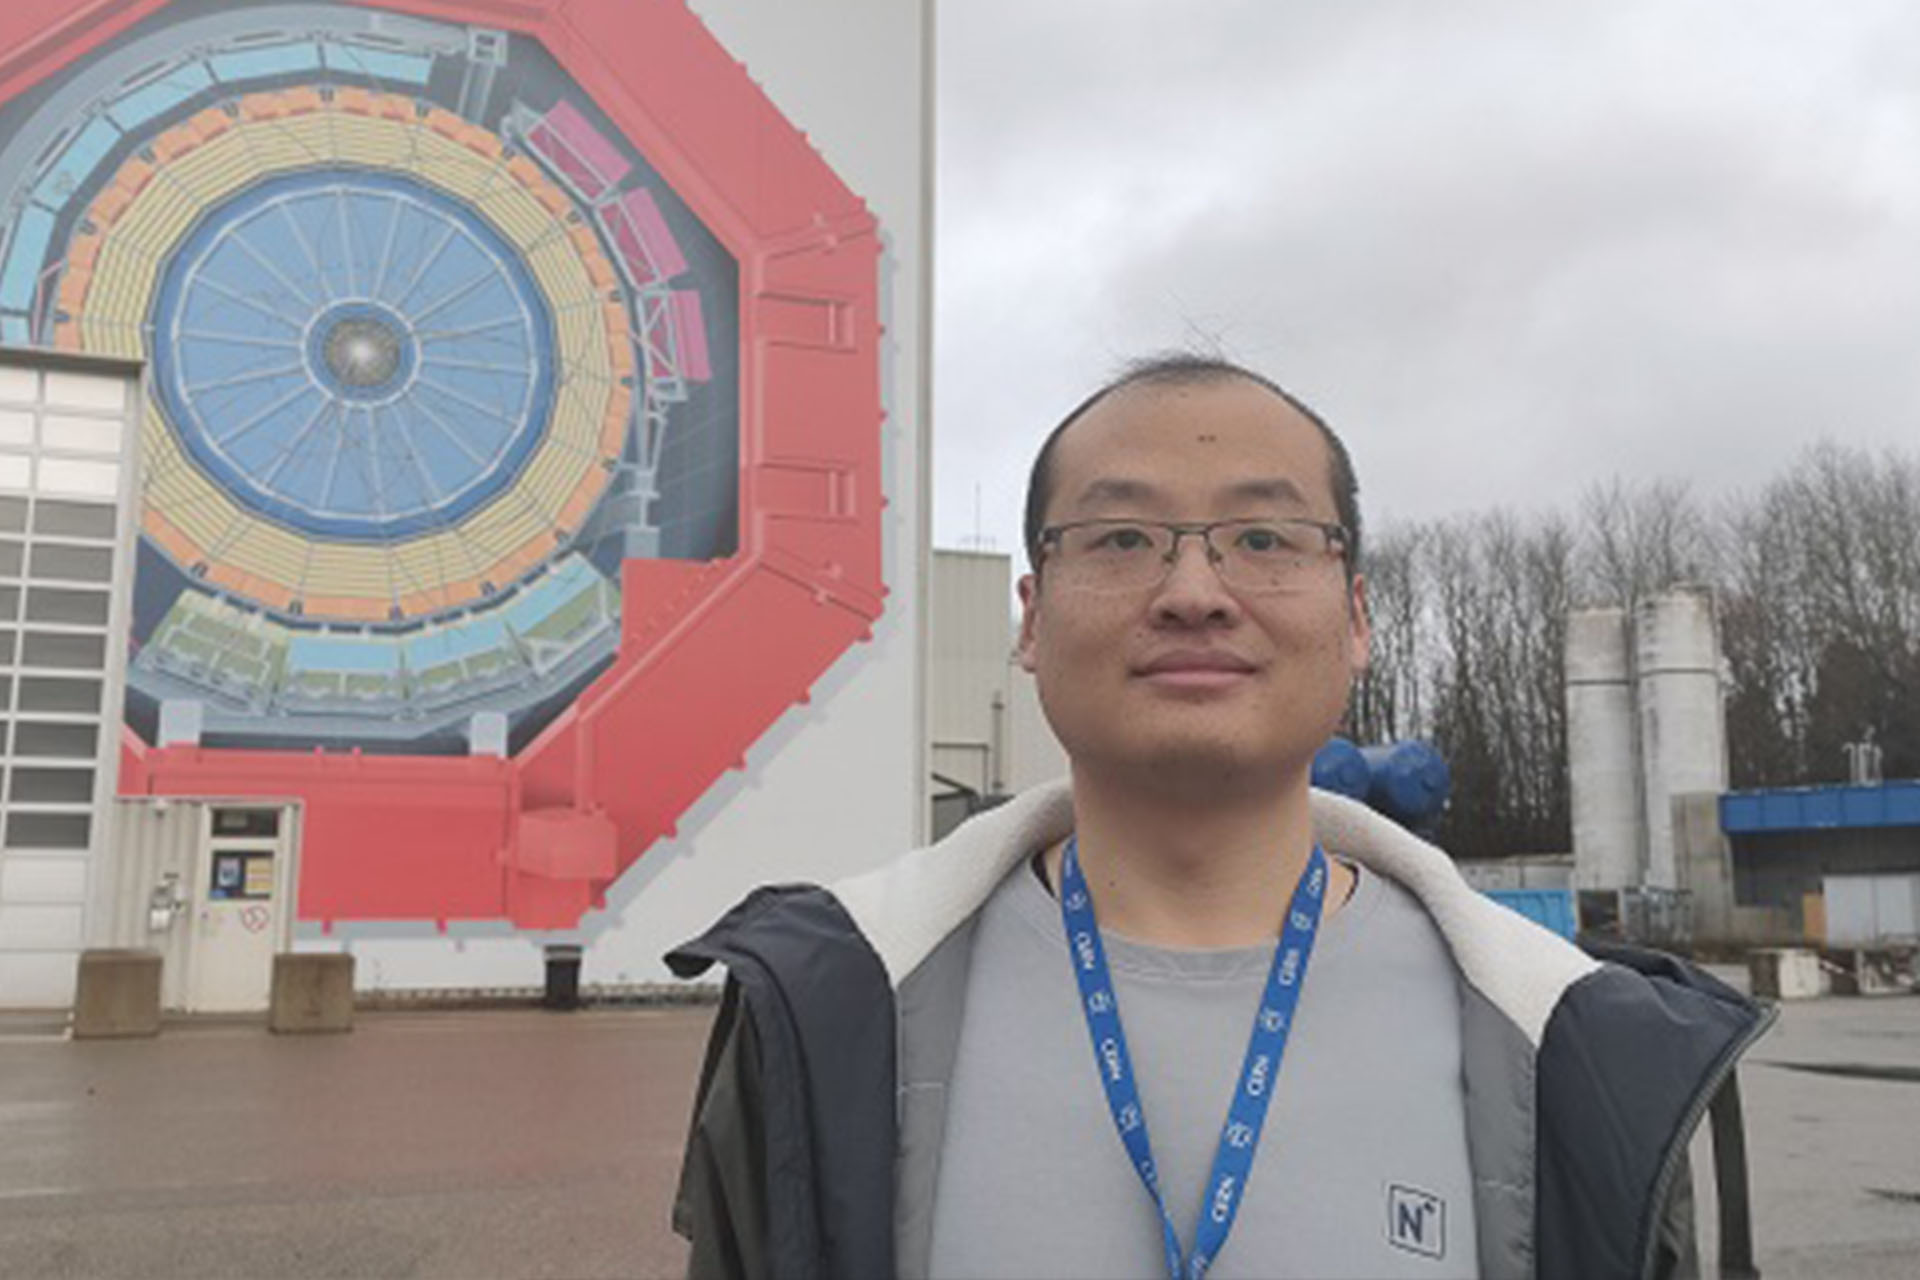 Dr Liu standing smiling near a large mural